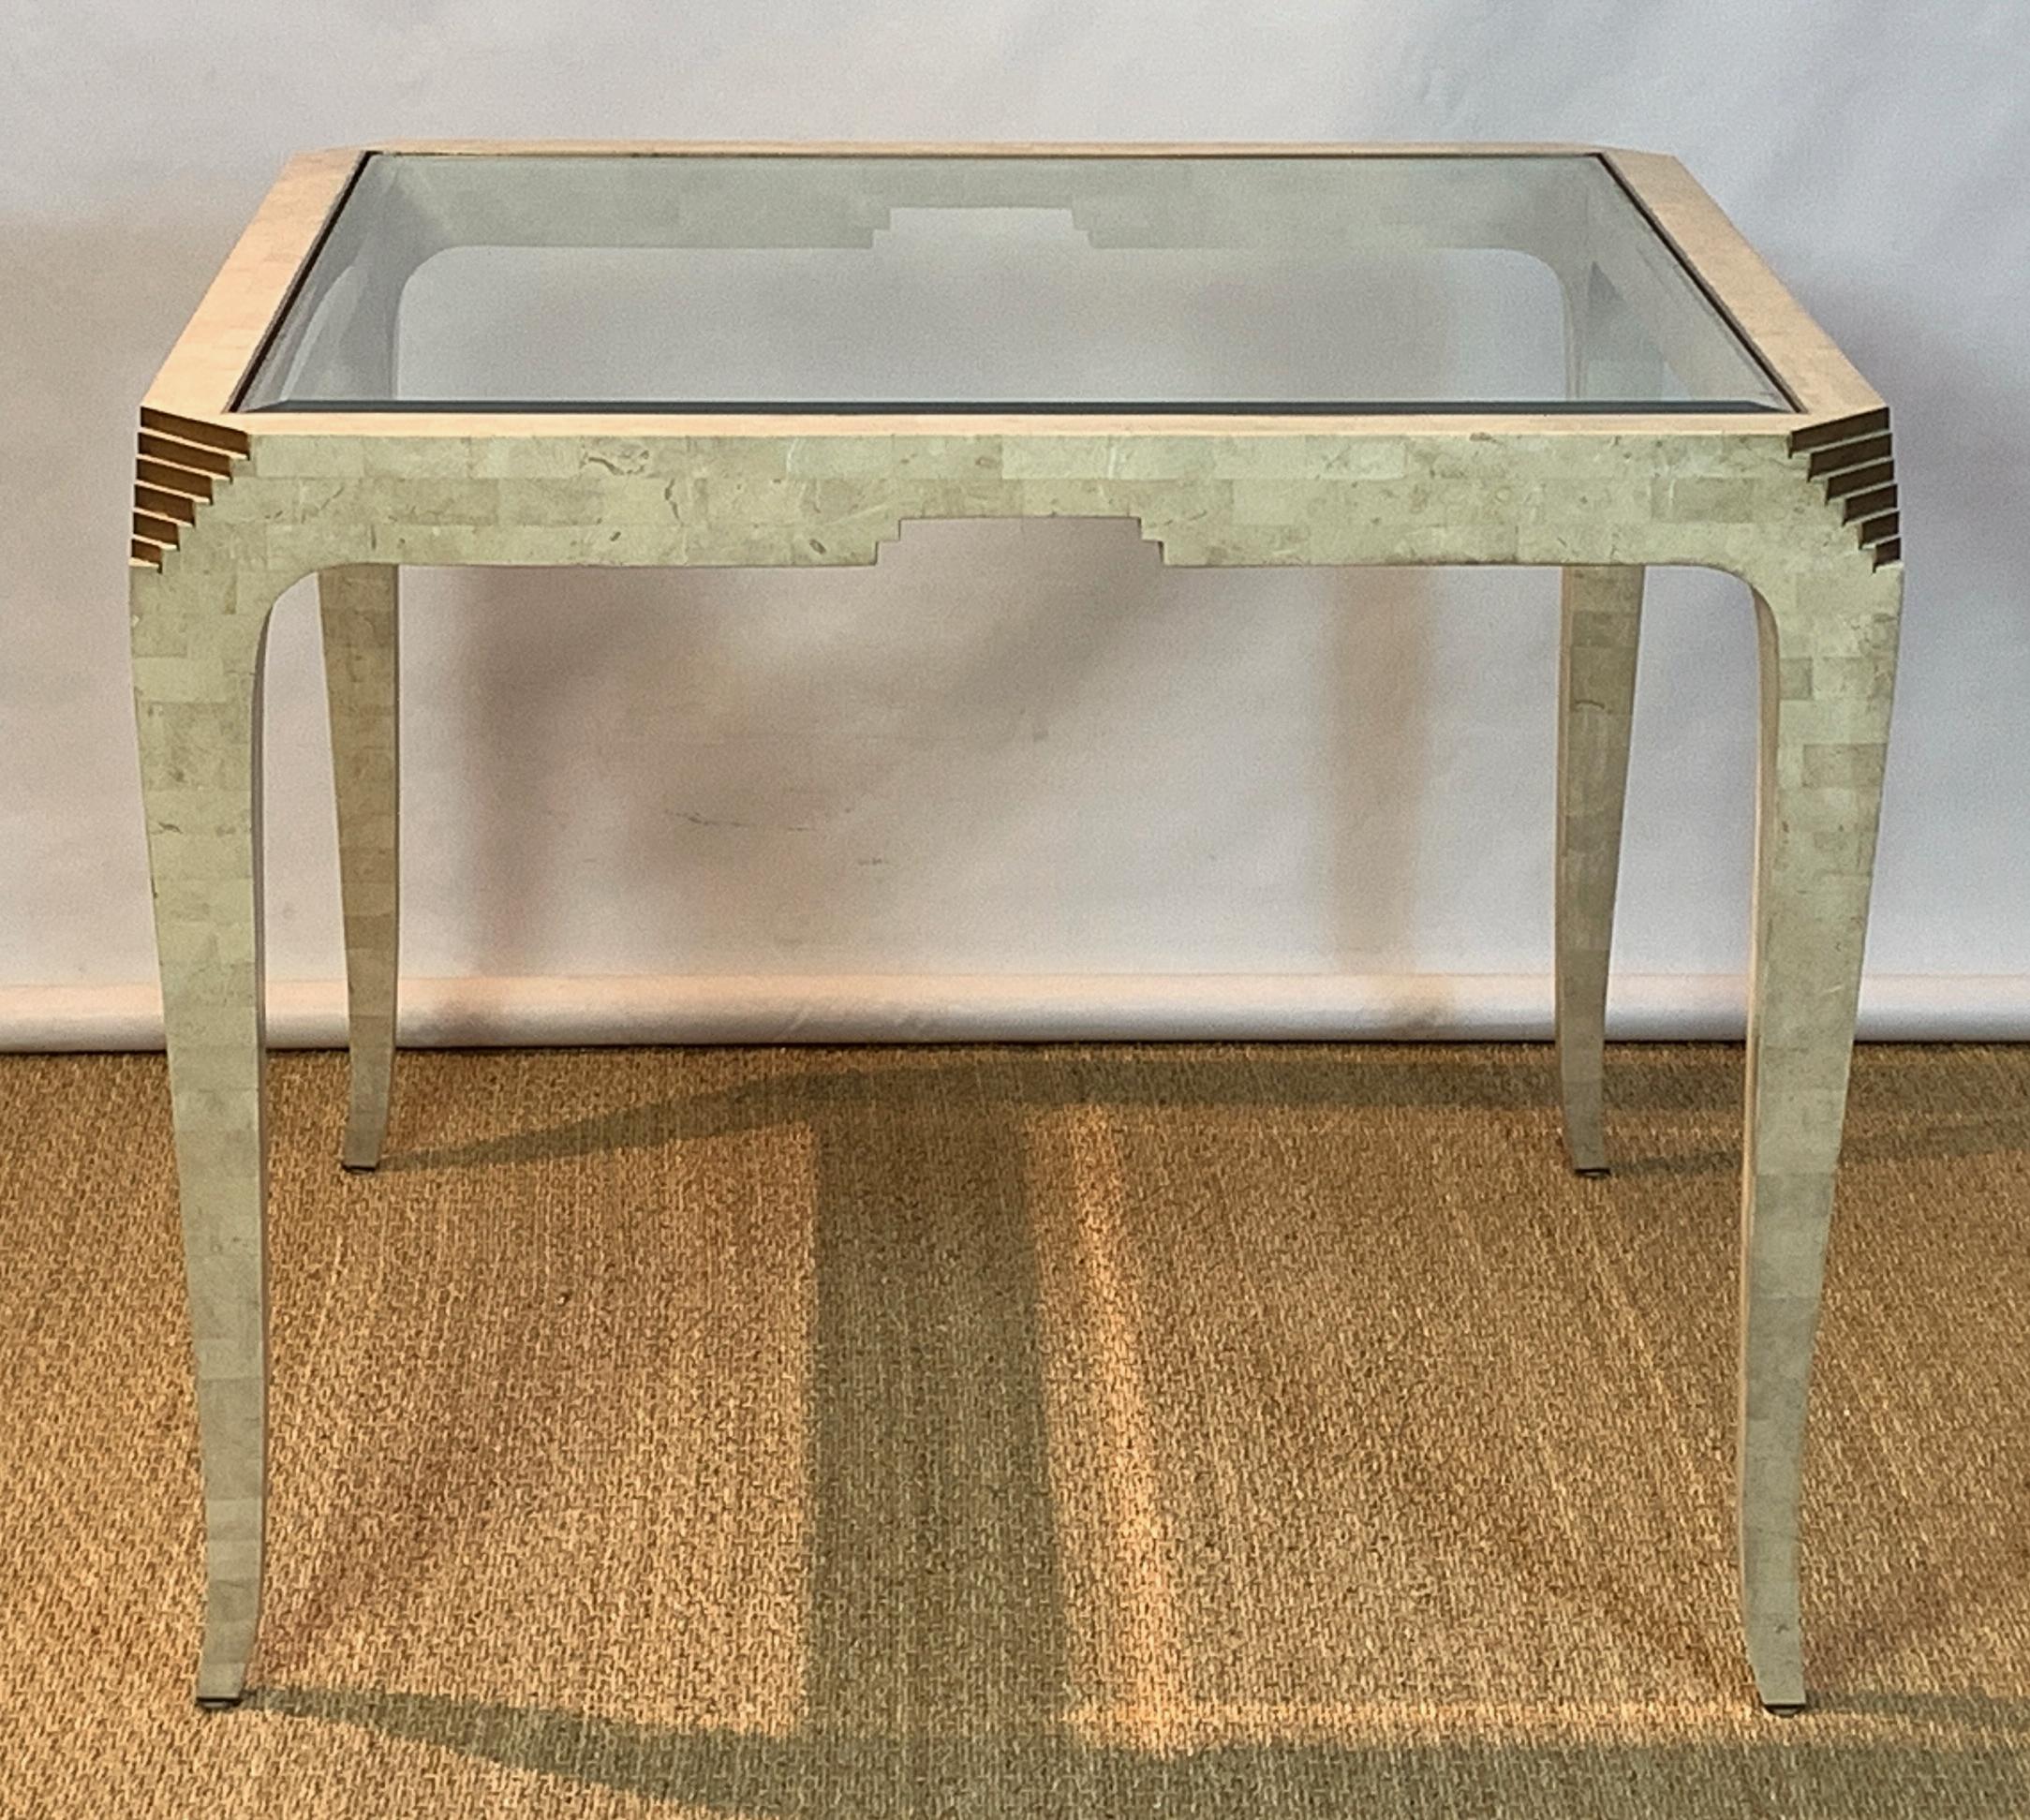 A fantastic mid-20th century tessellated coral stone games table with brass trim. The Art Deco Revival table was designed by Merle Edelman for Casa Bique and features thin tapering legs with stepped brass accents to the canted corners and brass